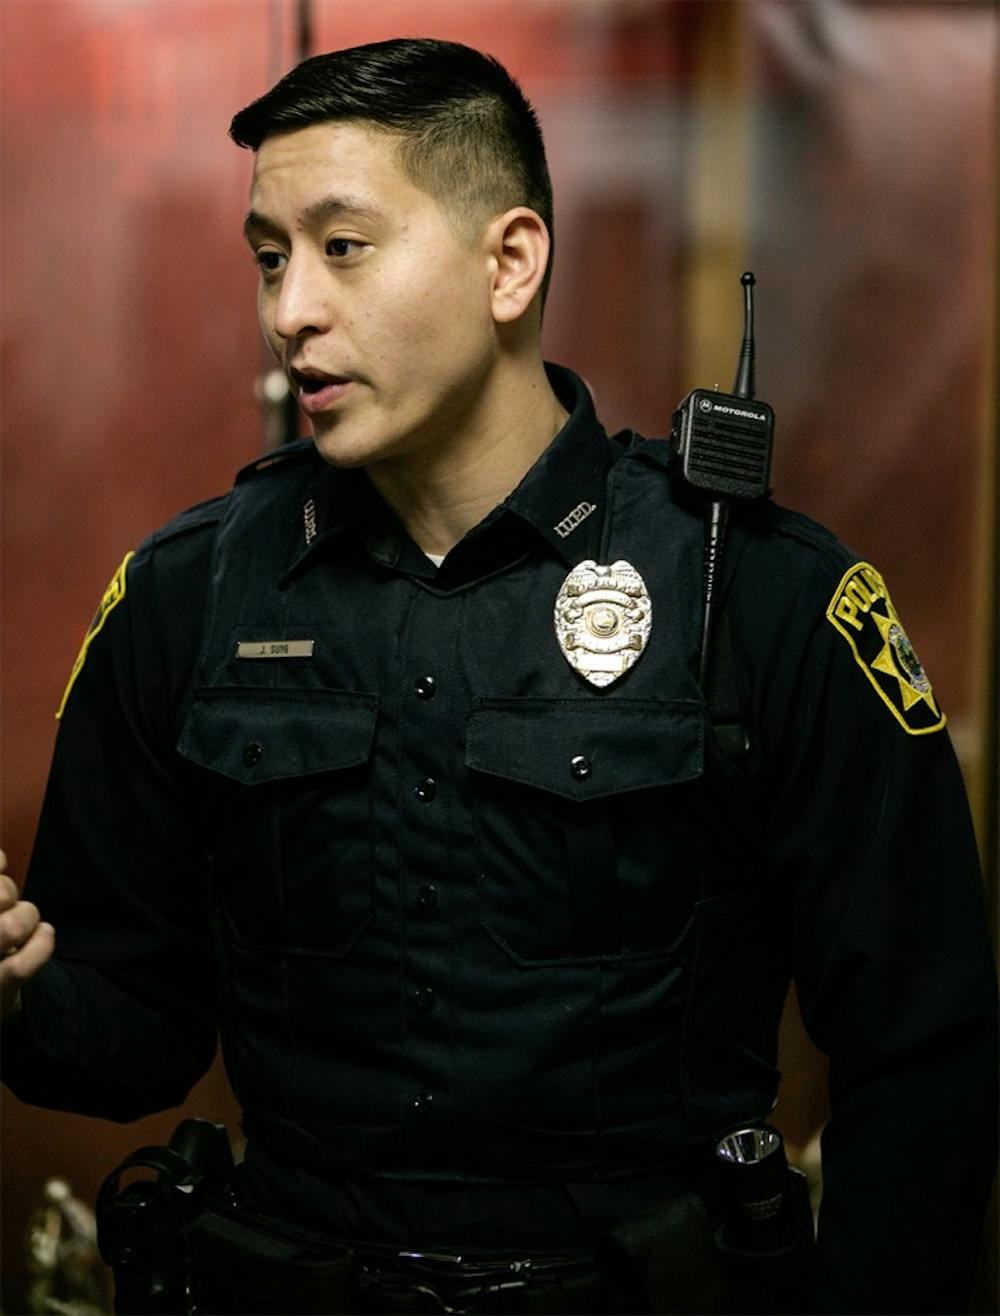 IUPD officer Joshua Sung talks to patrons entering Assembly Hall last Wednesday for a basketball game against Nebraska. Sung is one of many officers who provides security throughout Assembly Hall for the basketball games.